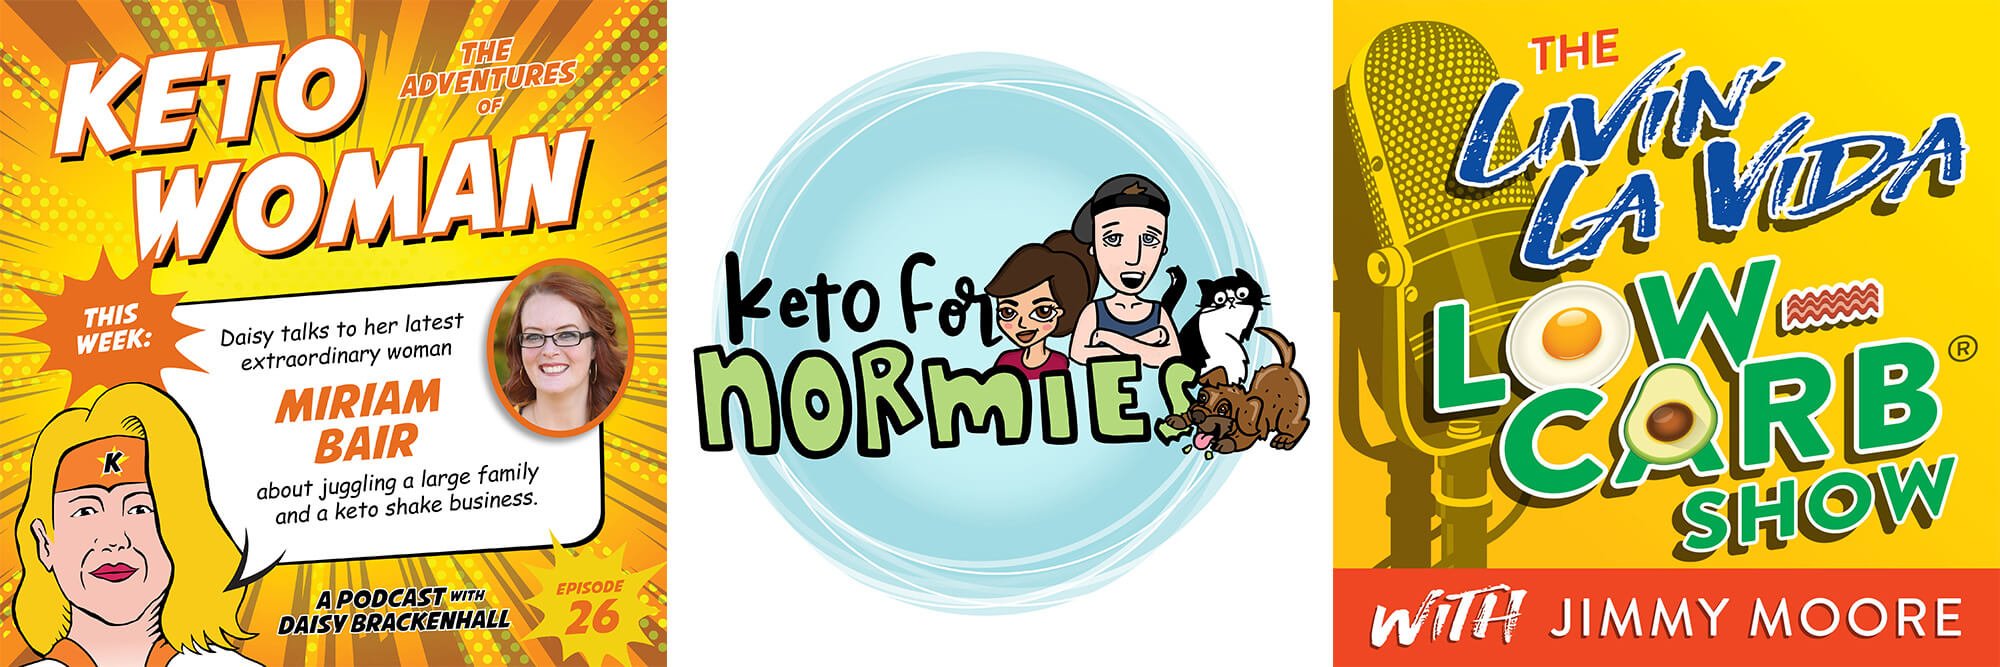 keto for normies